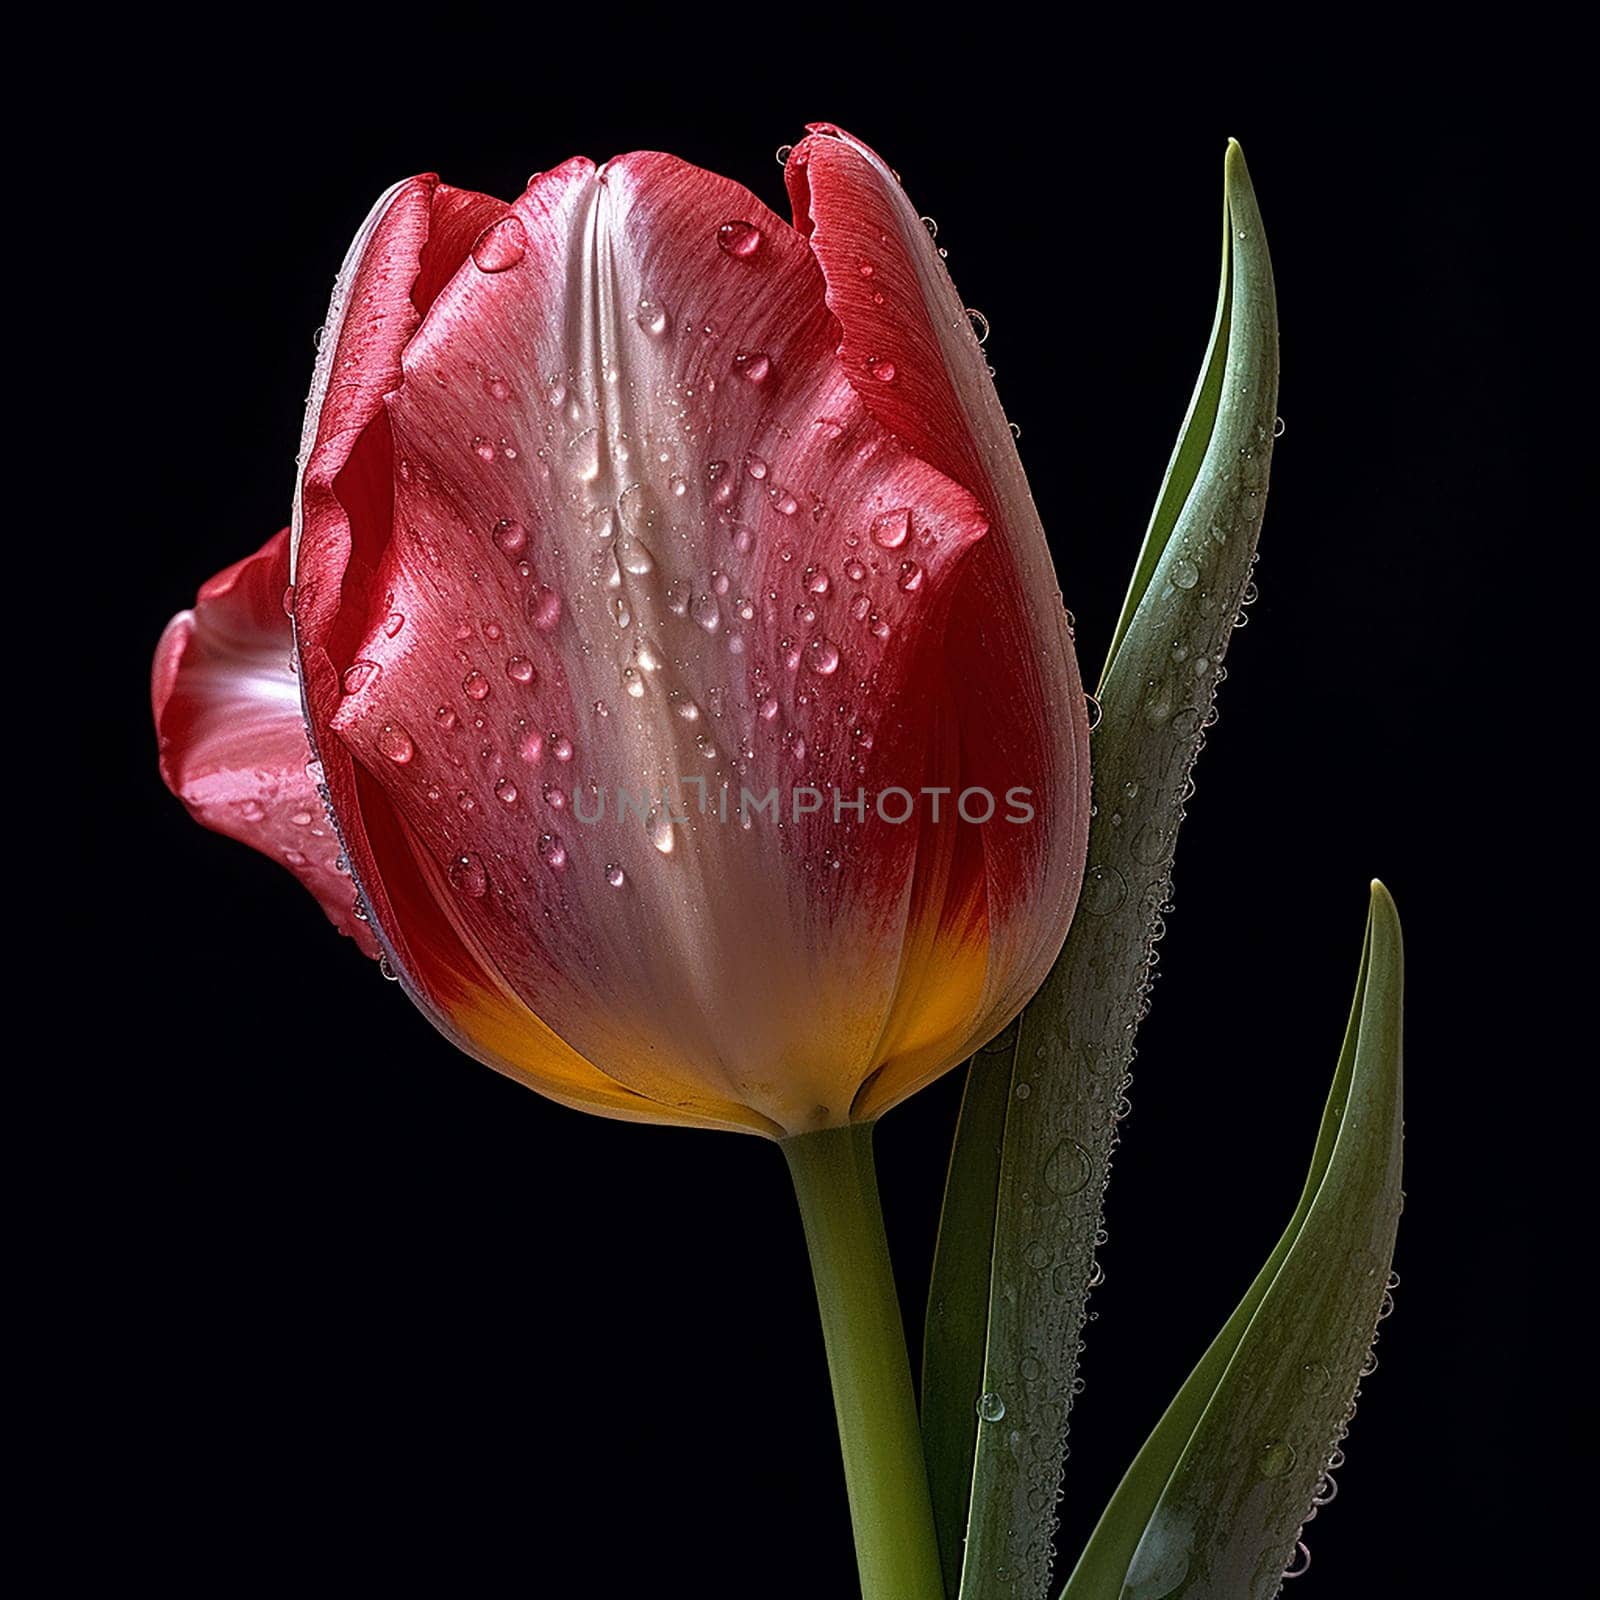 Close-up of a red tulip with water droplets against a dark background